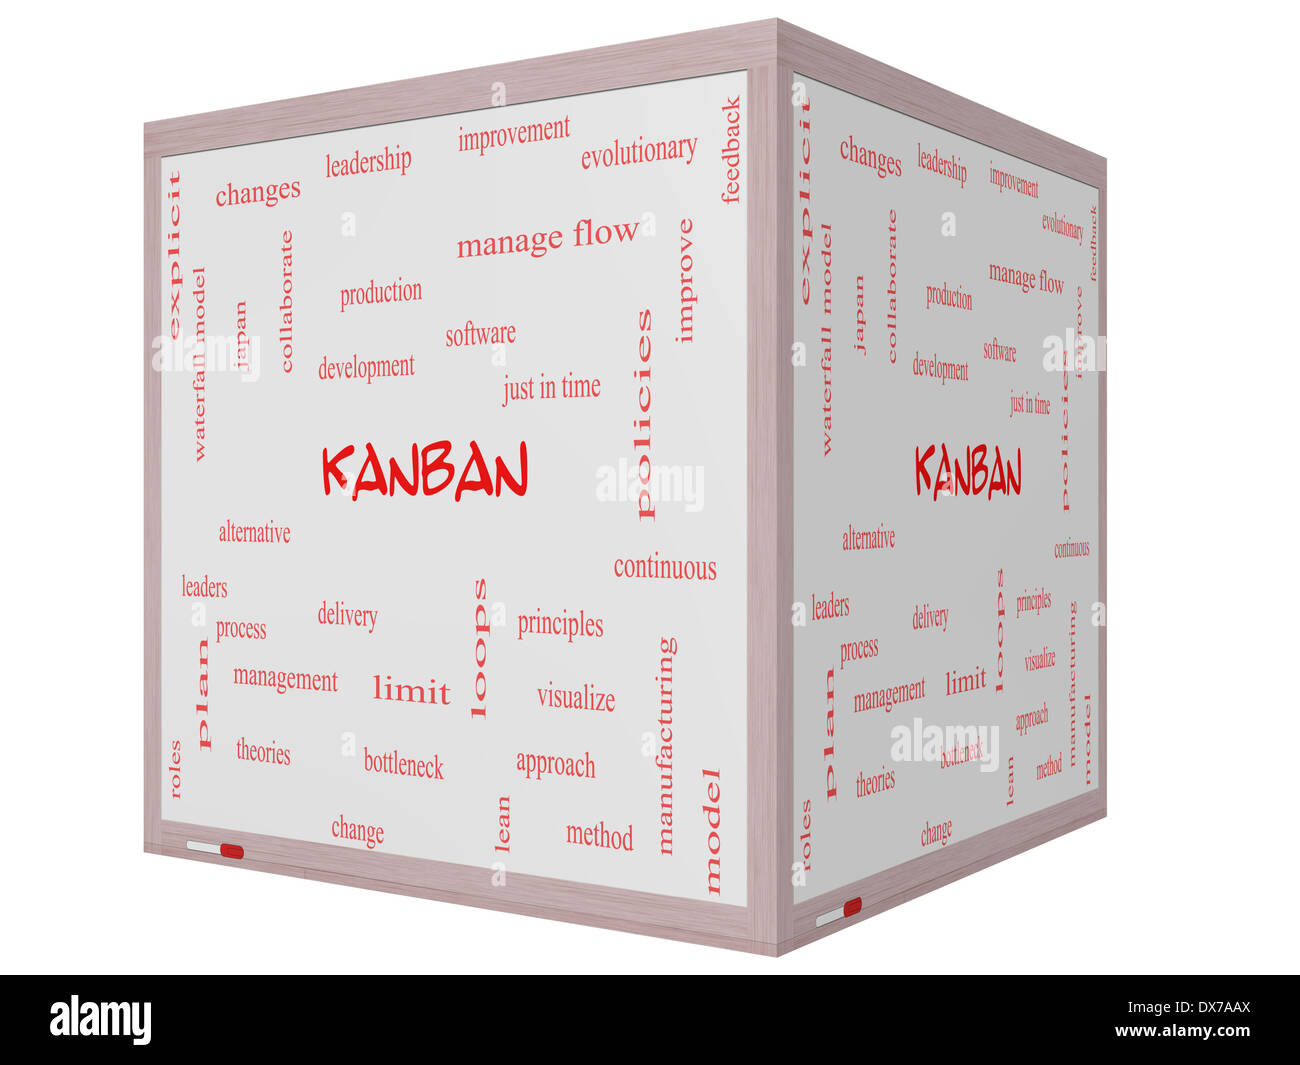 Kanban Word Cloud Concept on a 3D cube Whiteboard with great terms such as loops, process, manage, flow and more. Stock Photo